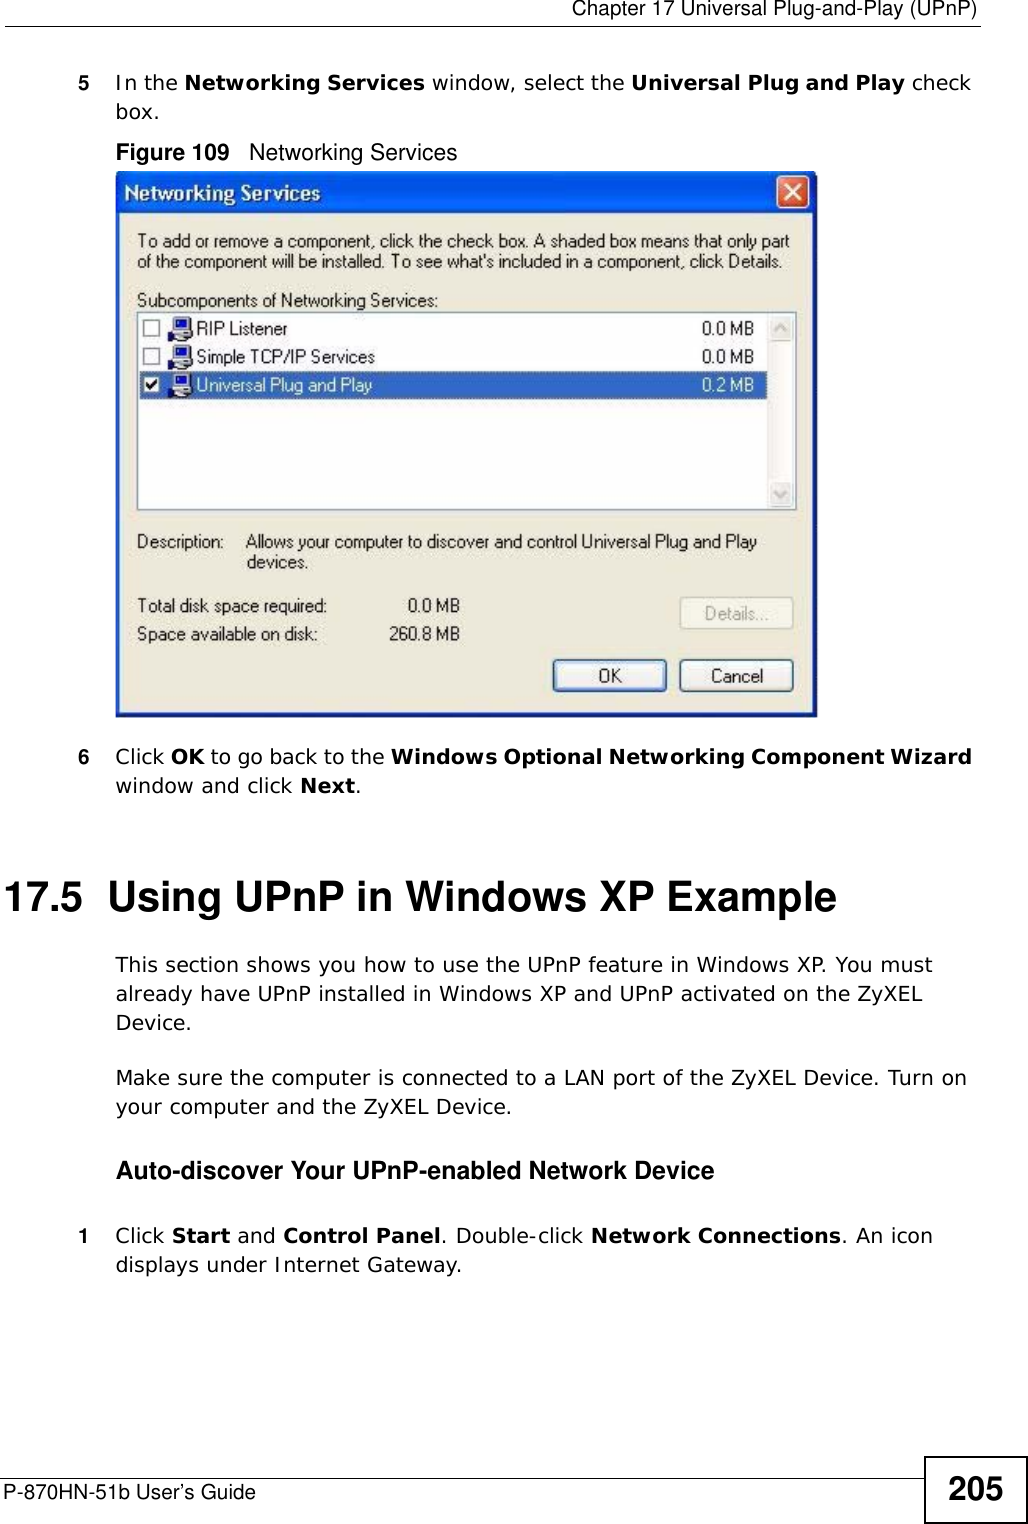  Chapter 17 Universal Plug-and-Play (UPnP)P-870HN-51b User’s Guide 2055In the Networking Services window, select the Universal Plug and Play check box. Figure 109   Networking Services6Click OK to go back to the Windows Optional Networking Component Wizard window and click Next. 17.5  Using UPnP in Windows XP ExampleThis section shows you how to use the UPnP feature in Windows XP. You must already have UPnP installed in Windows XP and UPnP activated on the ZyXEL Device.Make sure the computer is connected to a LAN port of the ZyXEL Device. Turn on your computer and the ZyXEL Device. Auto-discover Your UPnP-enabled Network Device1Click Start and Control Panel. Double-click Network Connections. An icon displays under Internet Gateway.